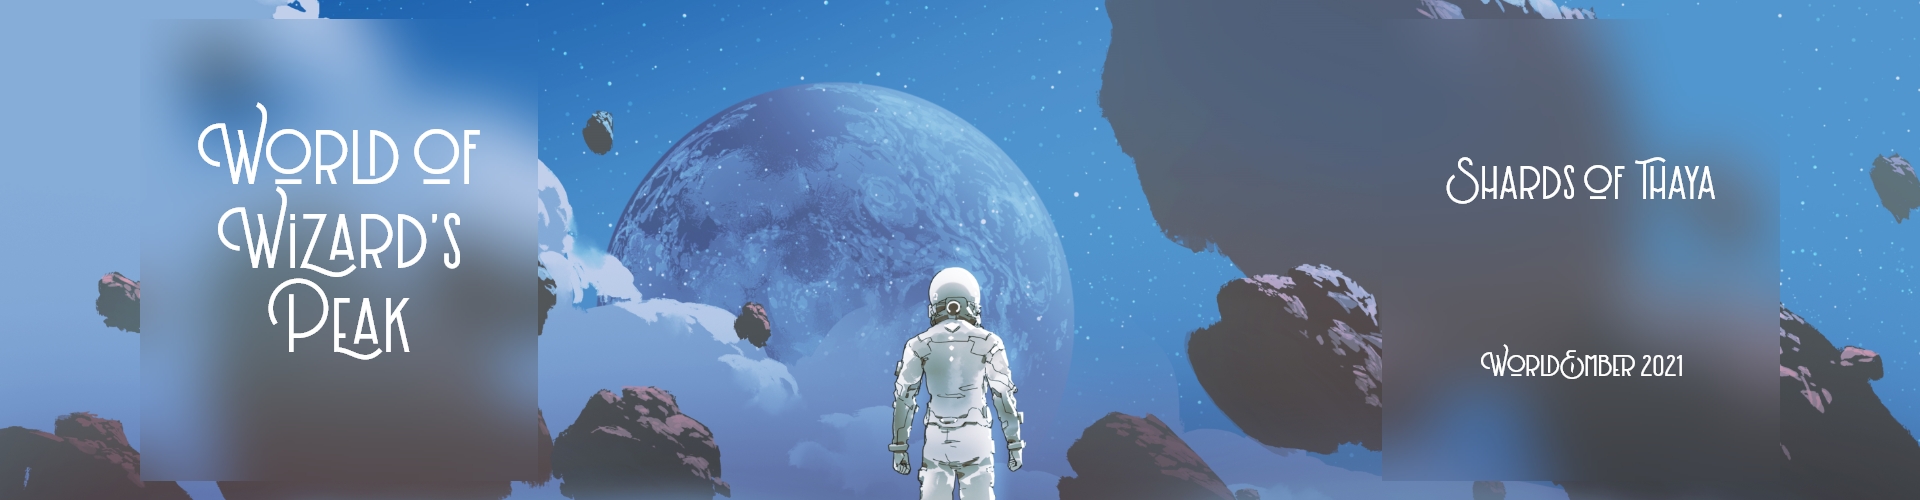 A person on a moon with floating islands around them.